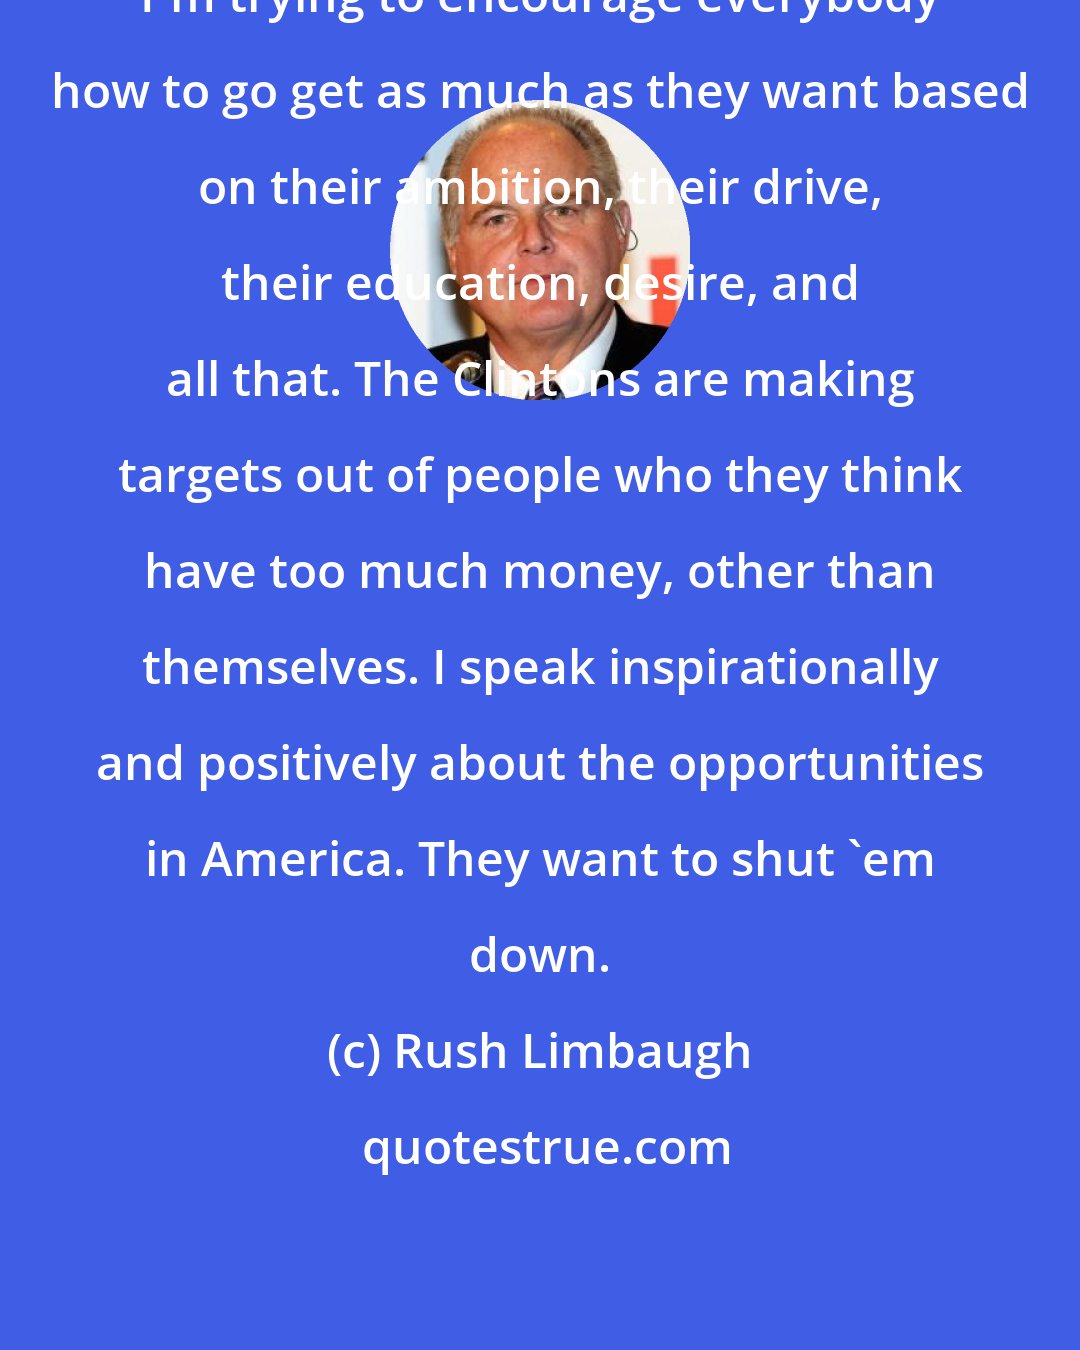 Rush Limbaugh: I'm trying to encourage everybody how to go get as much as they want based on their ambition, their drive, their education, desire, and all that. The Clintons are making targets out of people who they think have too much money, other than themselves. I speak inspirationally and positively about the opportunities in America. They want to shut 'em down.